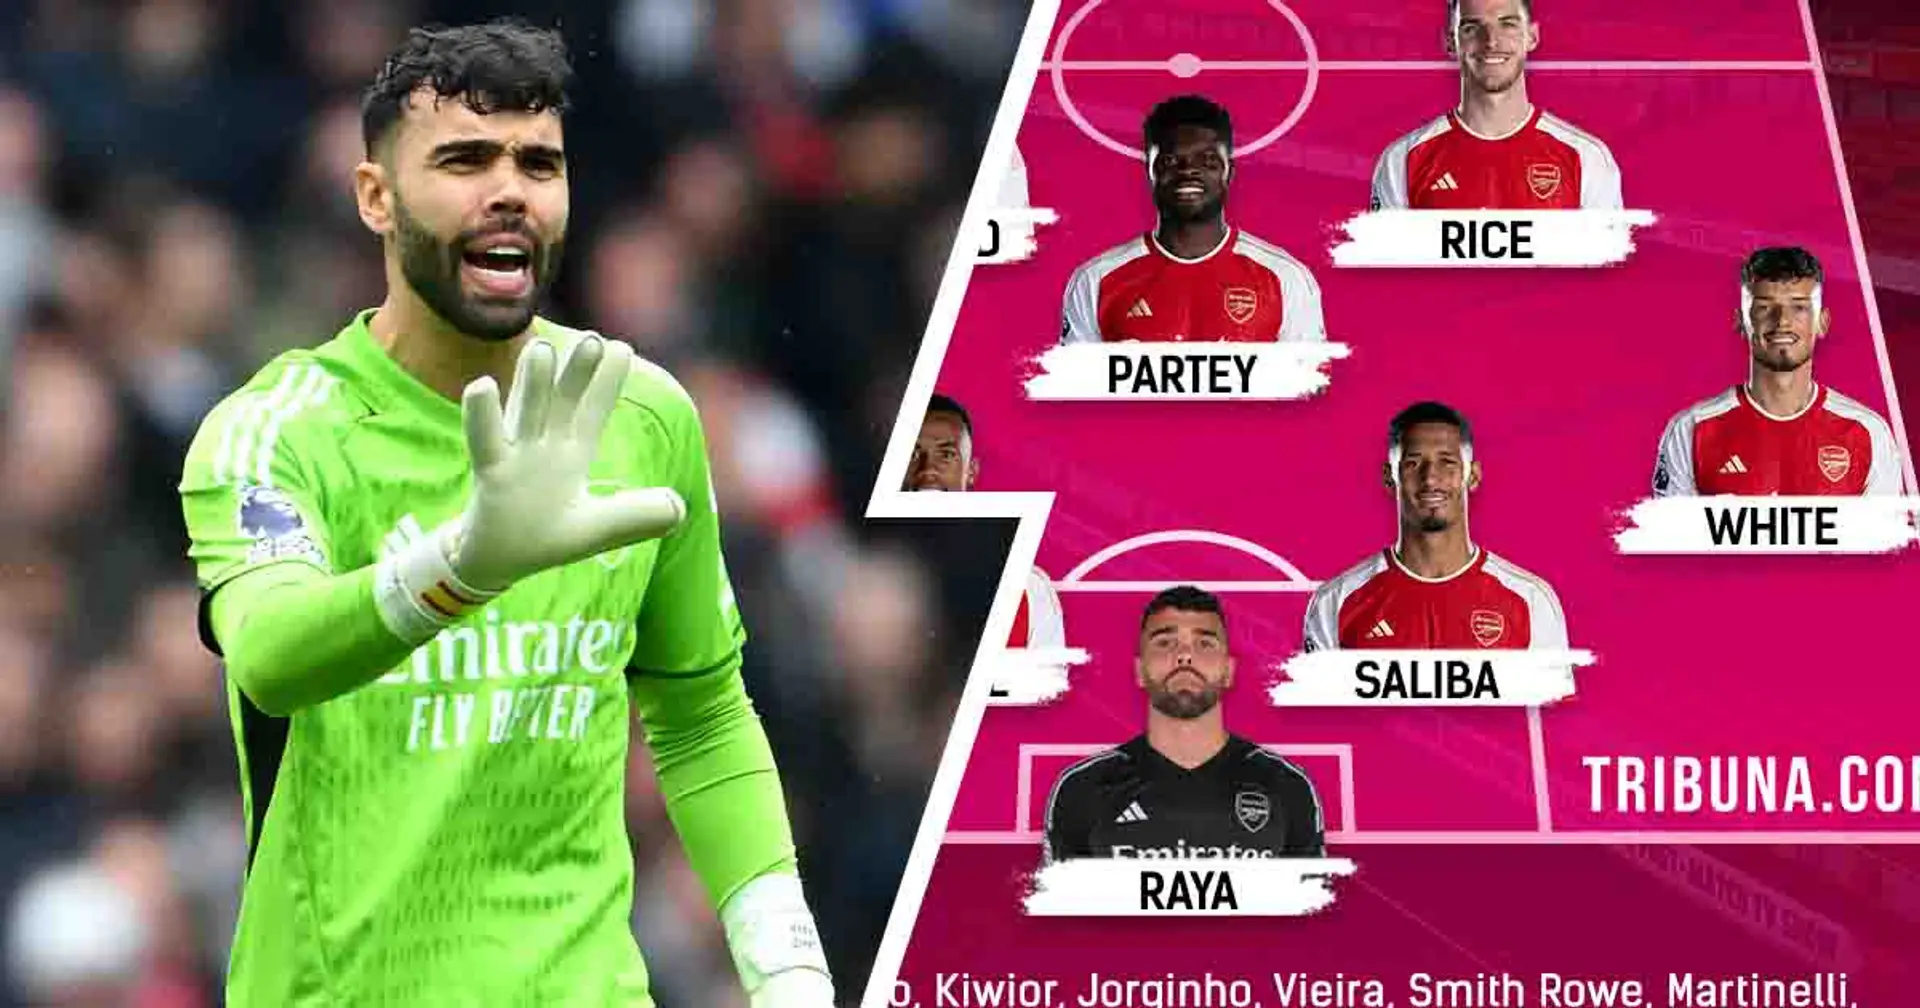 Arsenal's biggest weakness in Tottenham Hotspur win shown in lineup – features two players